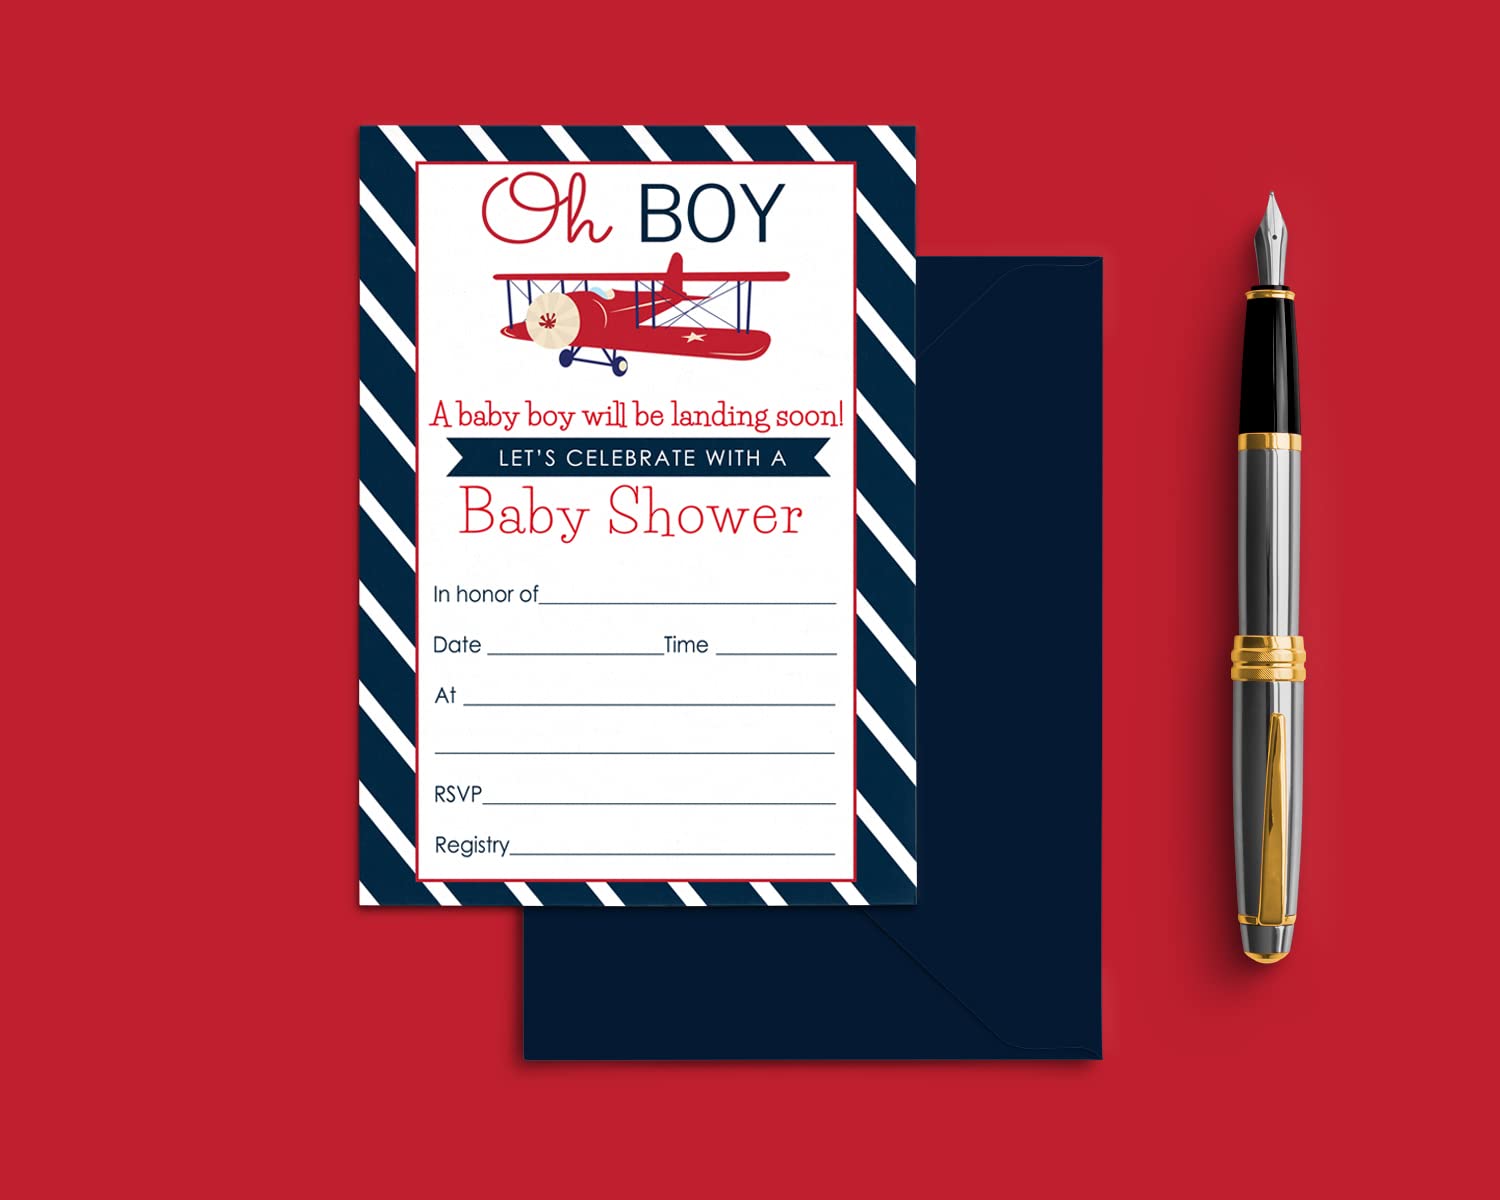 Paper Clever Party Airplane Baby Shower Invitations Boy, Custom DIY Cards 4x6 InvitesPaper Clever Party